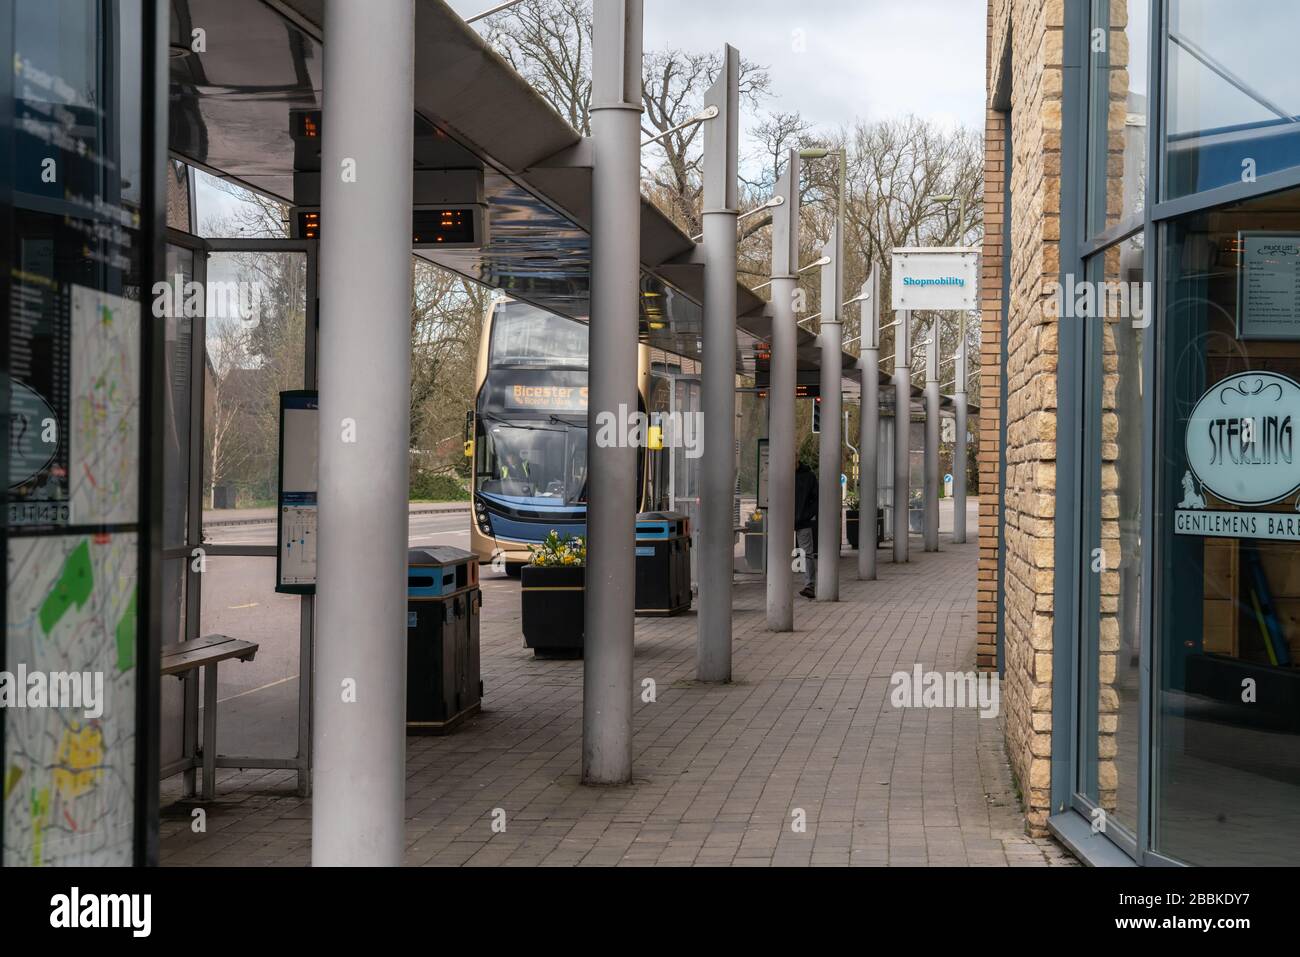 A deserted bus stop in Bicester, Oxfordshire, late morning, illustrates the impact of social distancing measures. Stay at Home directive. UK lockdown. Stock Photo